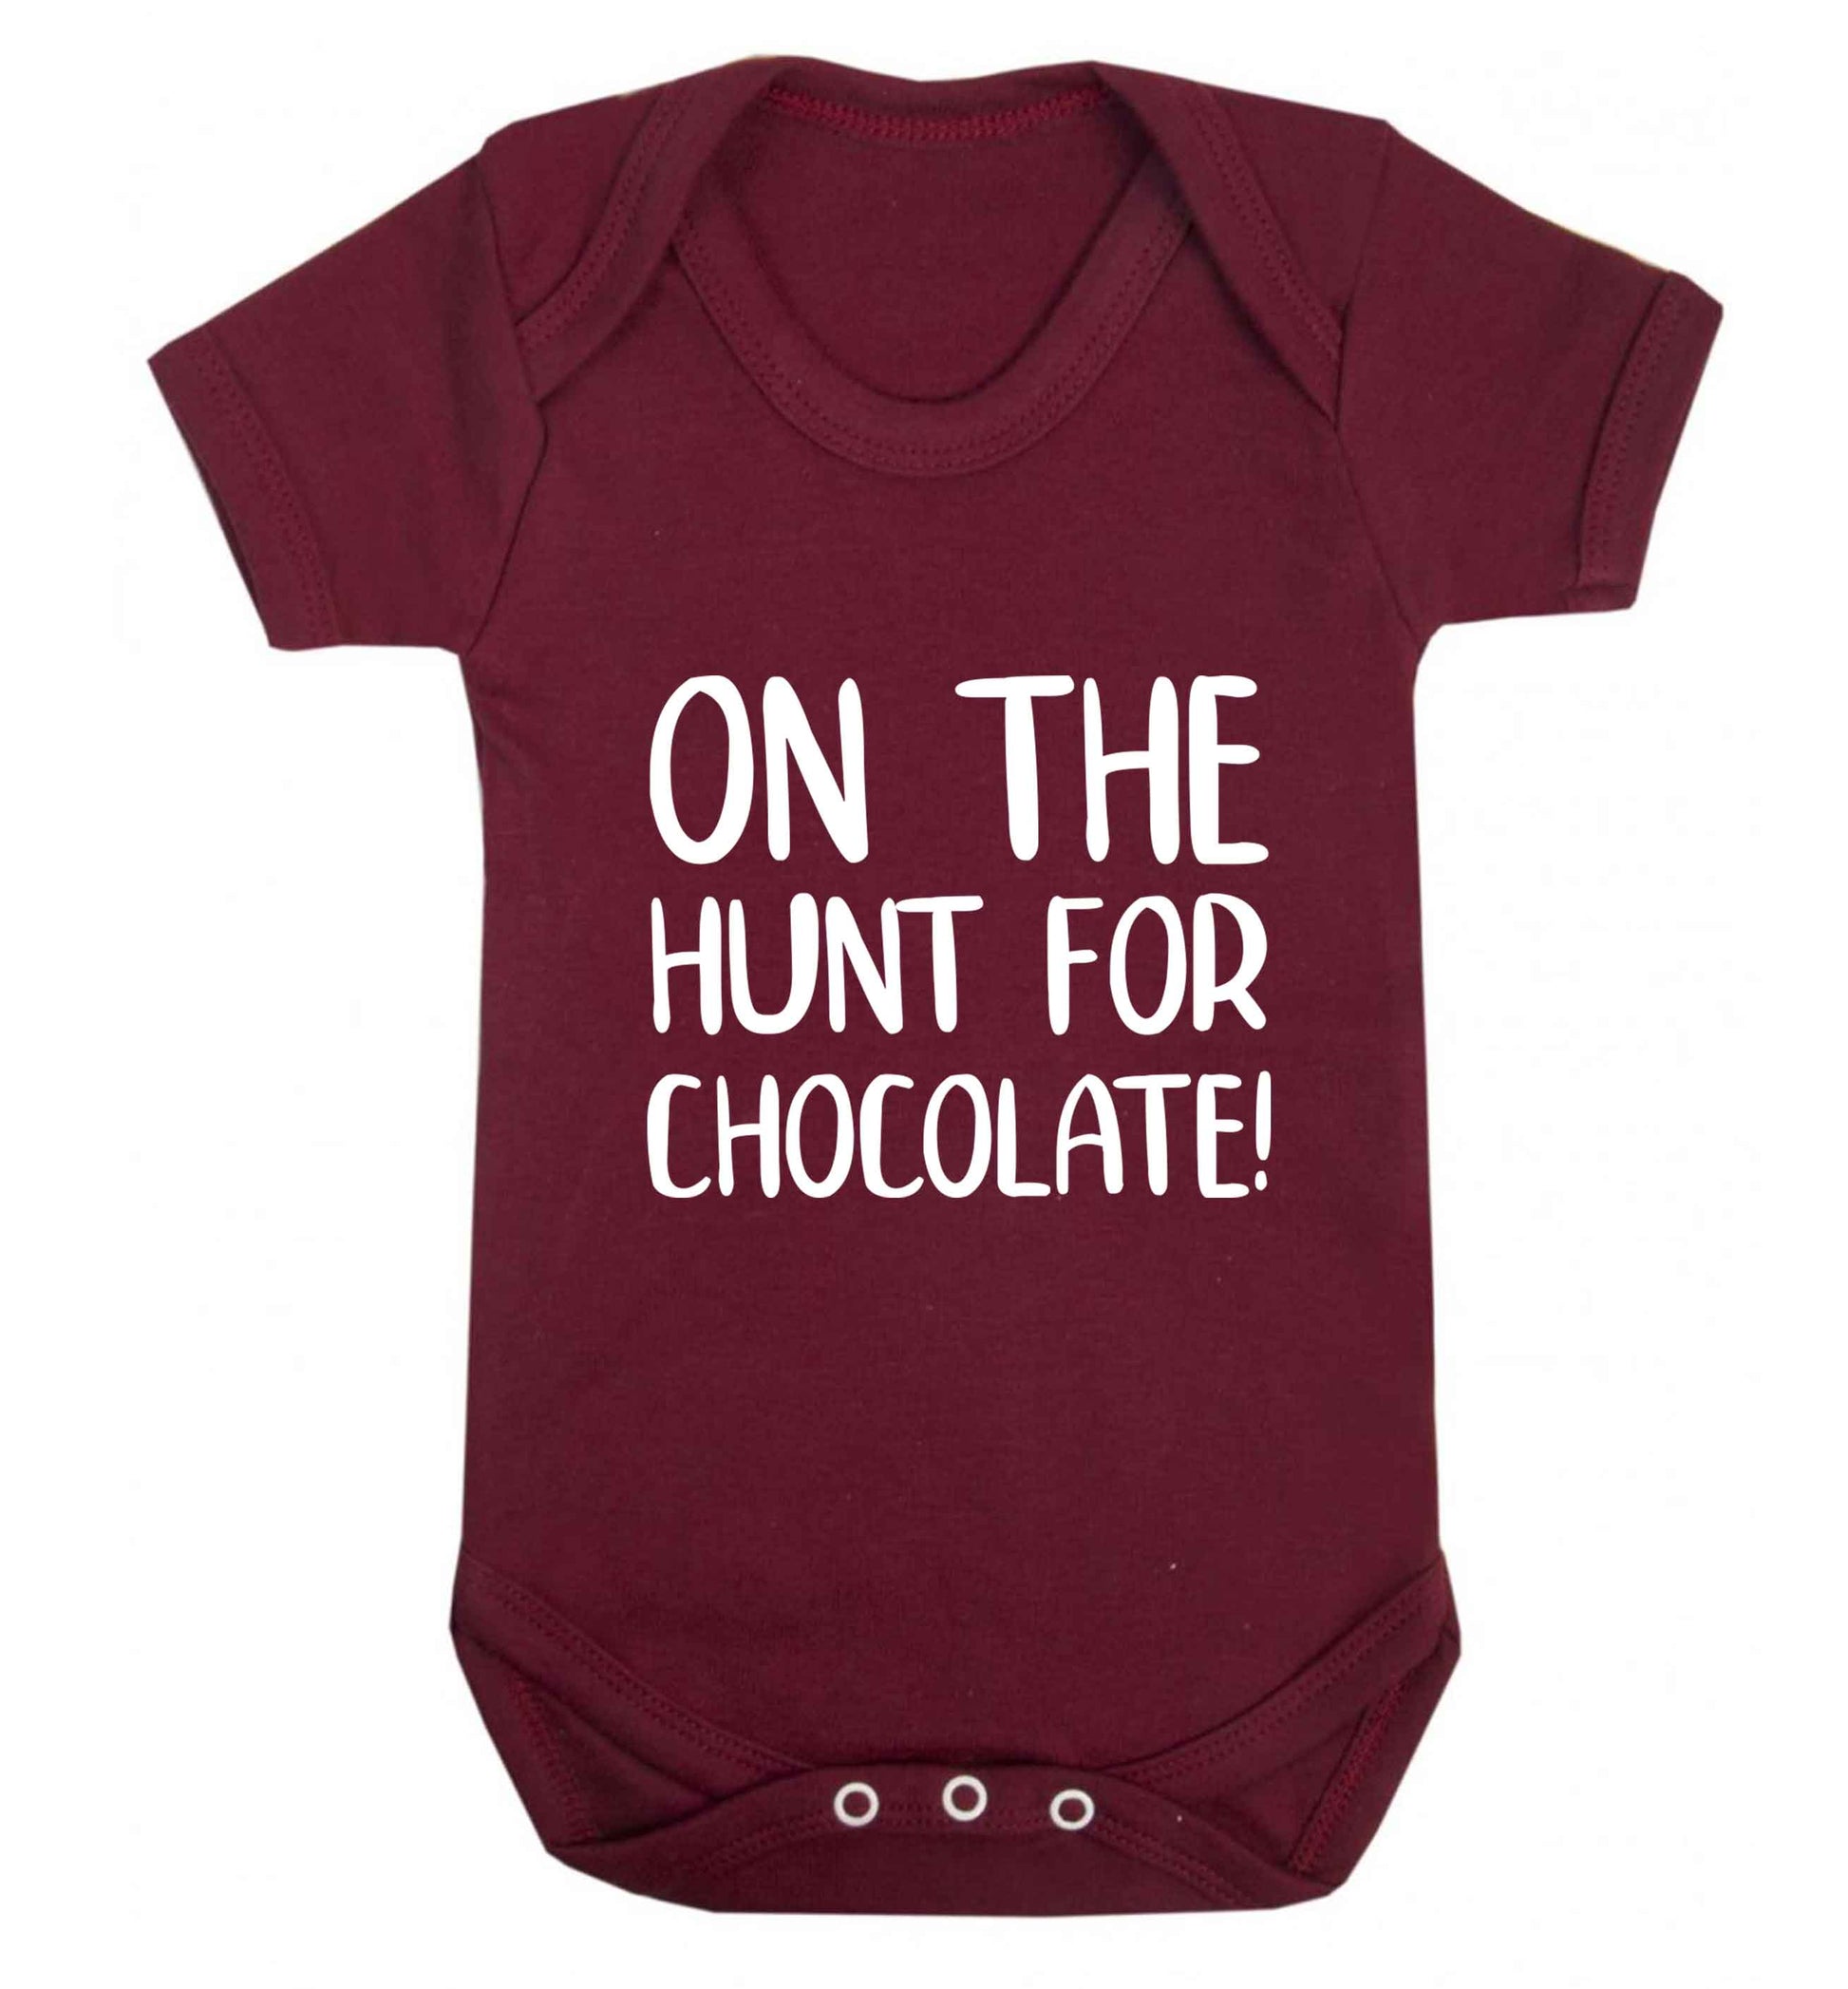 On the hunt for chocolate! baby vest maroon 18-24 months